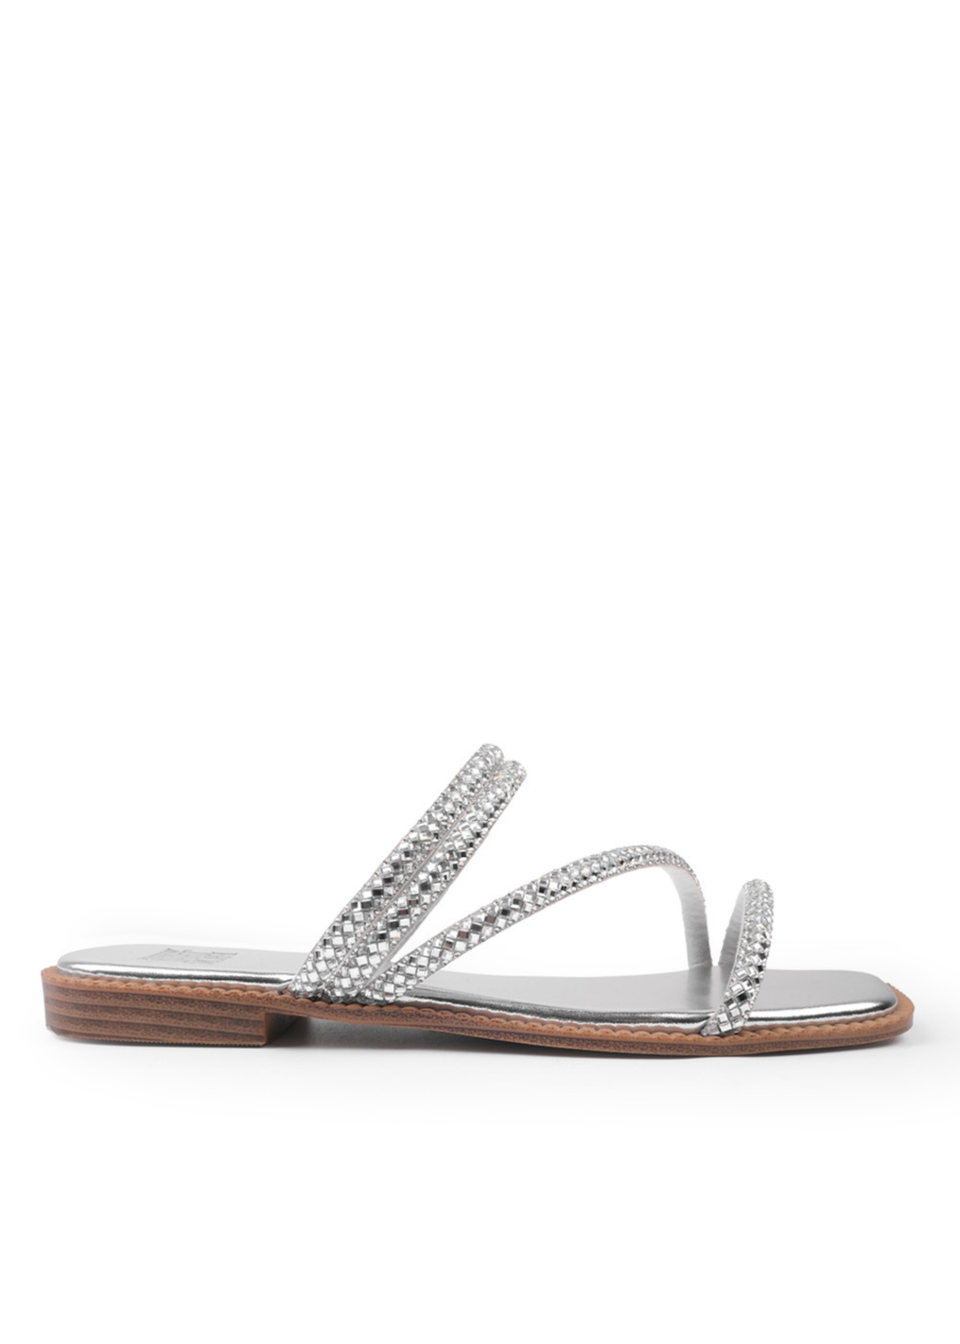 Where's That From Dream Extra Wide Silver Strappy Slider Sandals